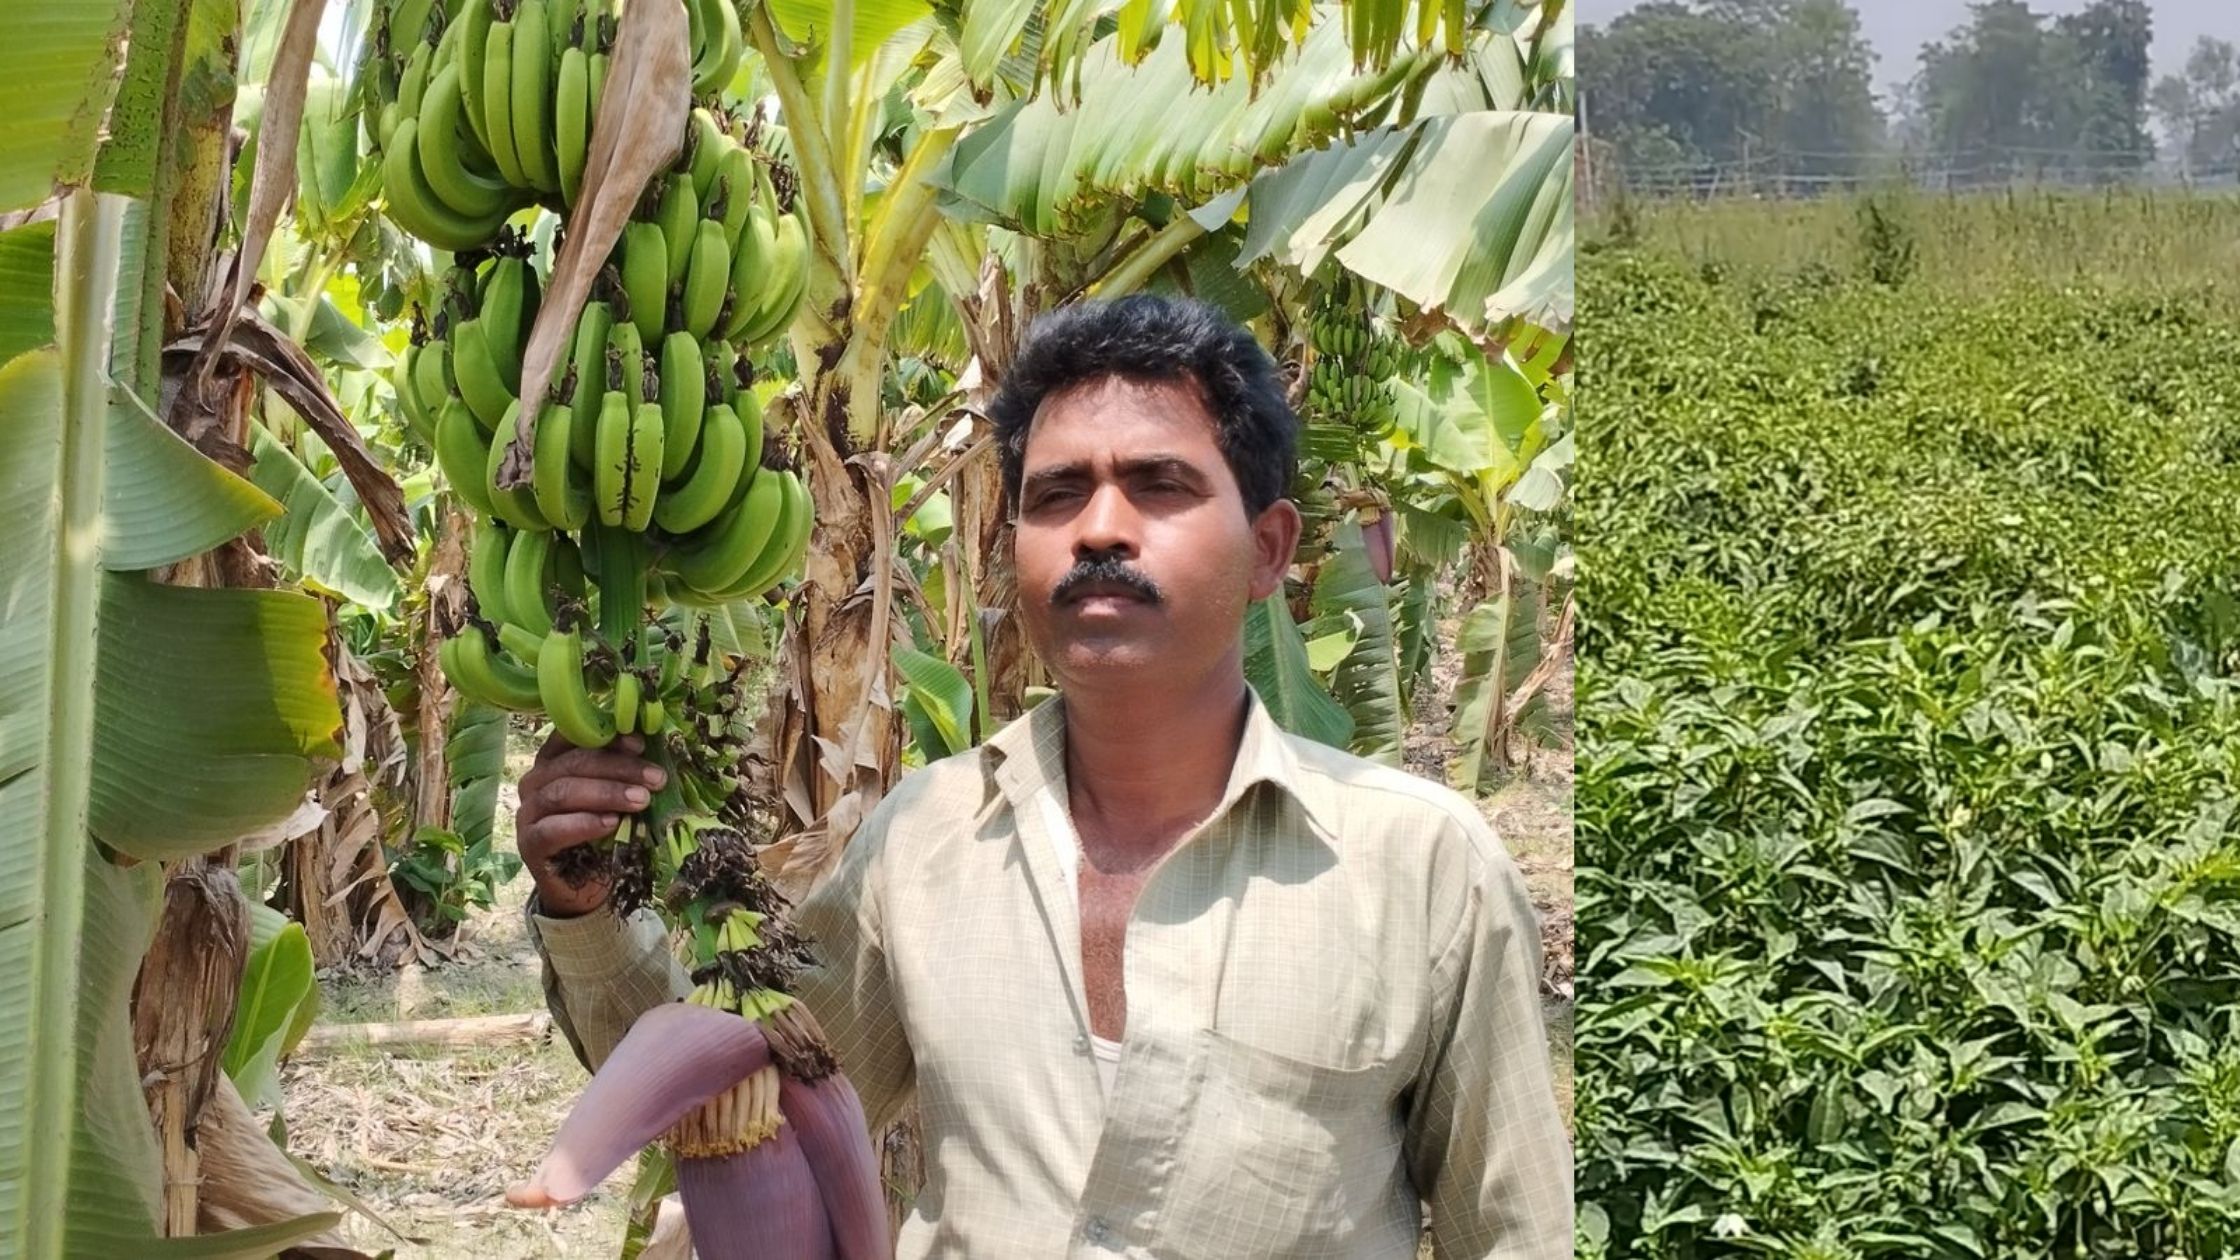 The man who returned from Dubai to Bihar started scientific farming